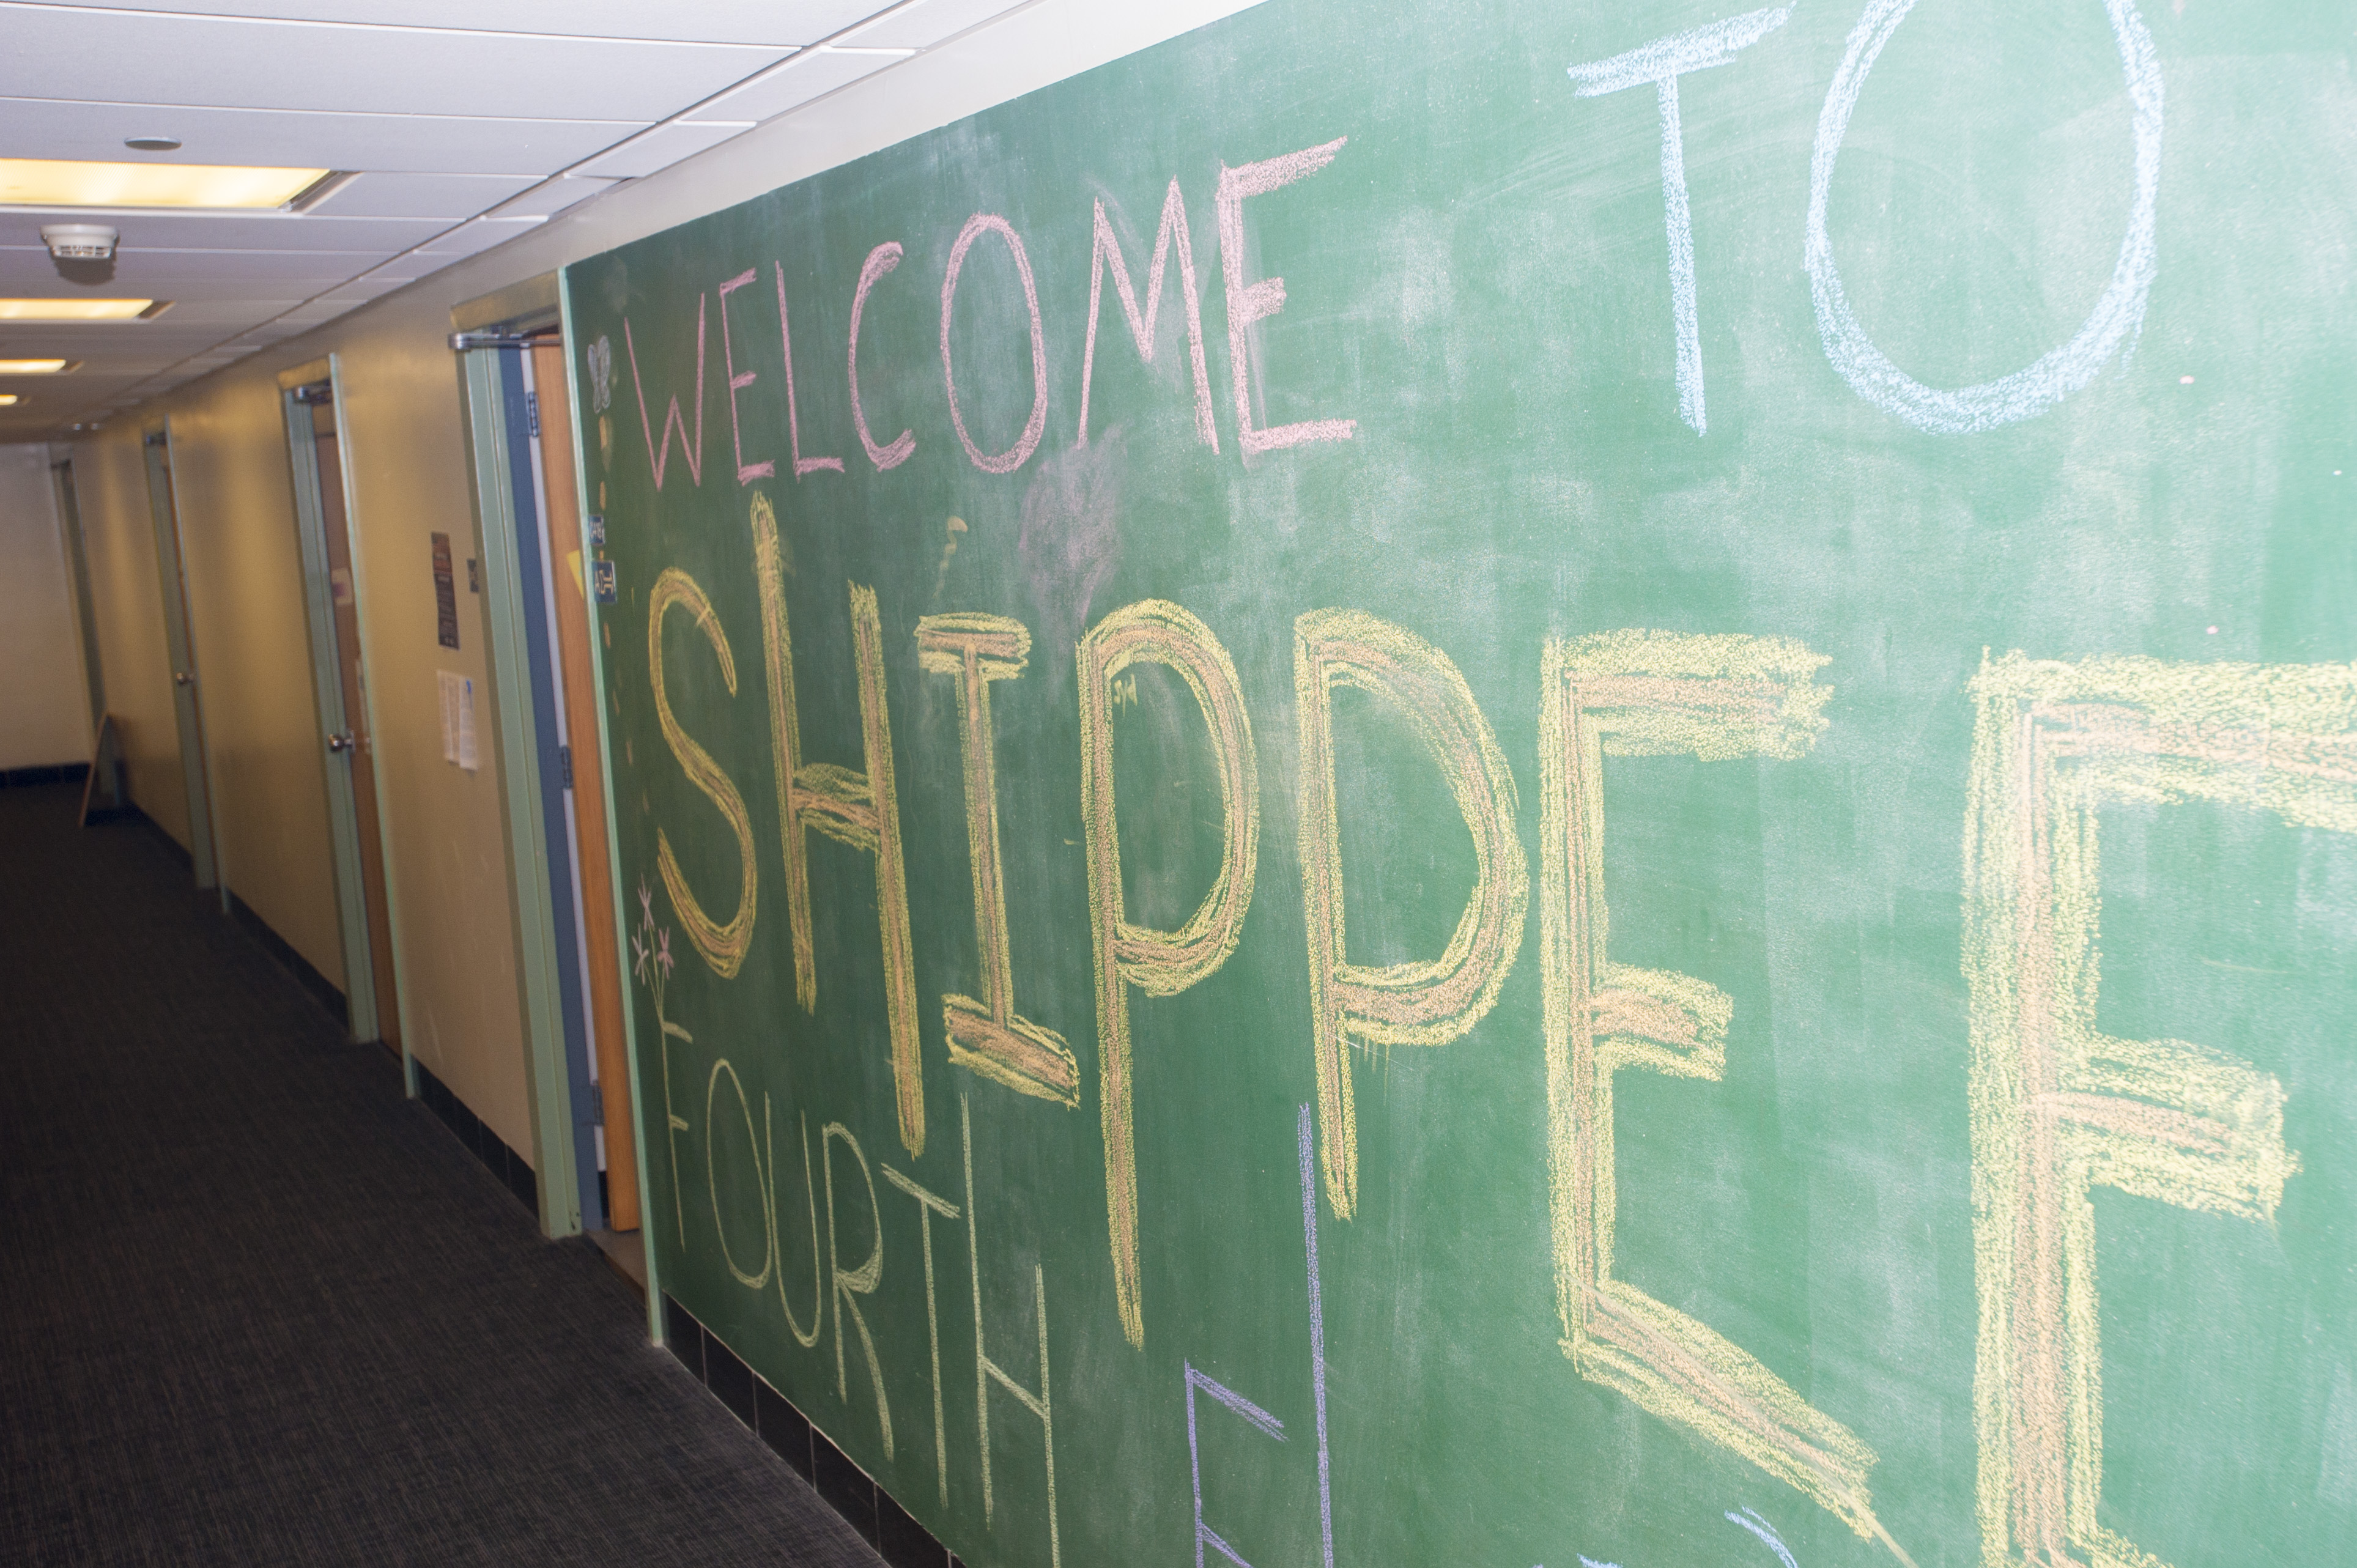 A large chalk board welcoming students to the Shippee residence hall